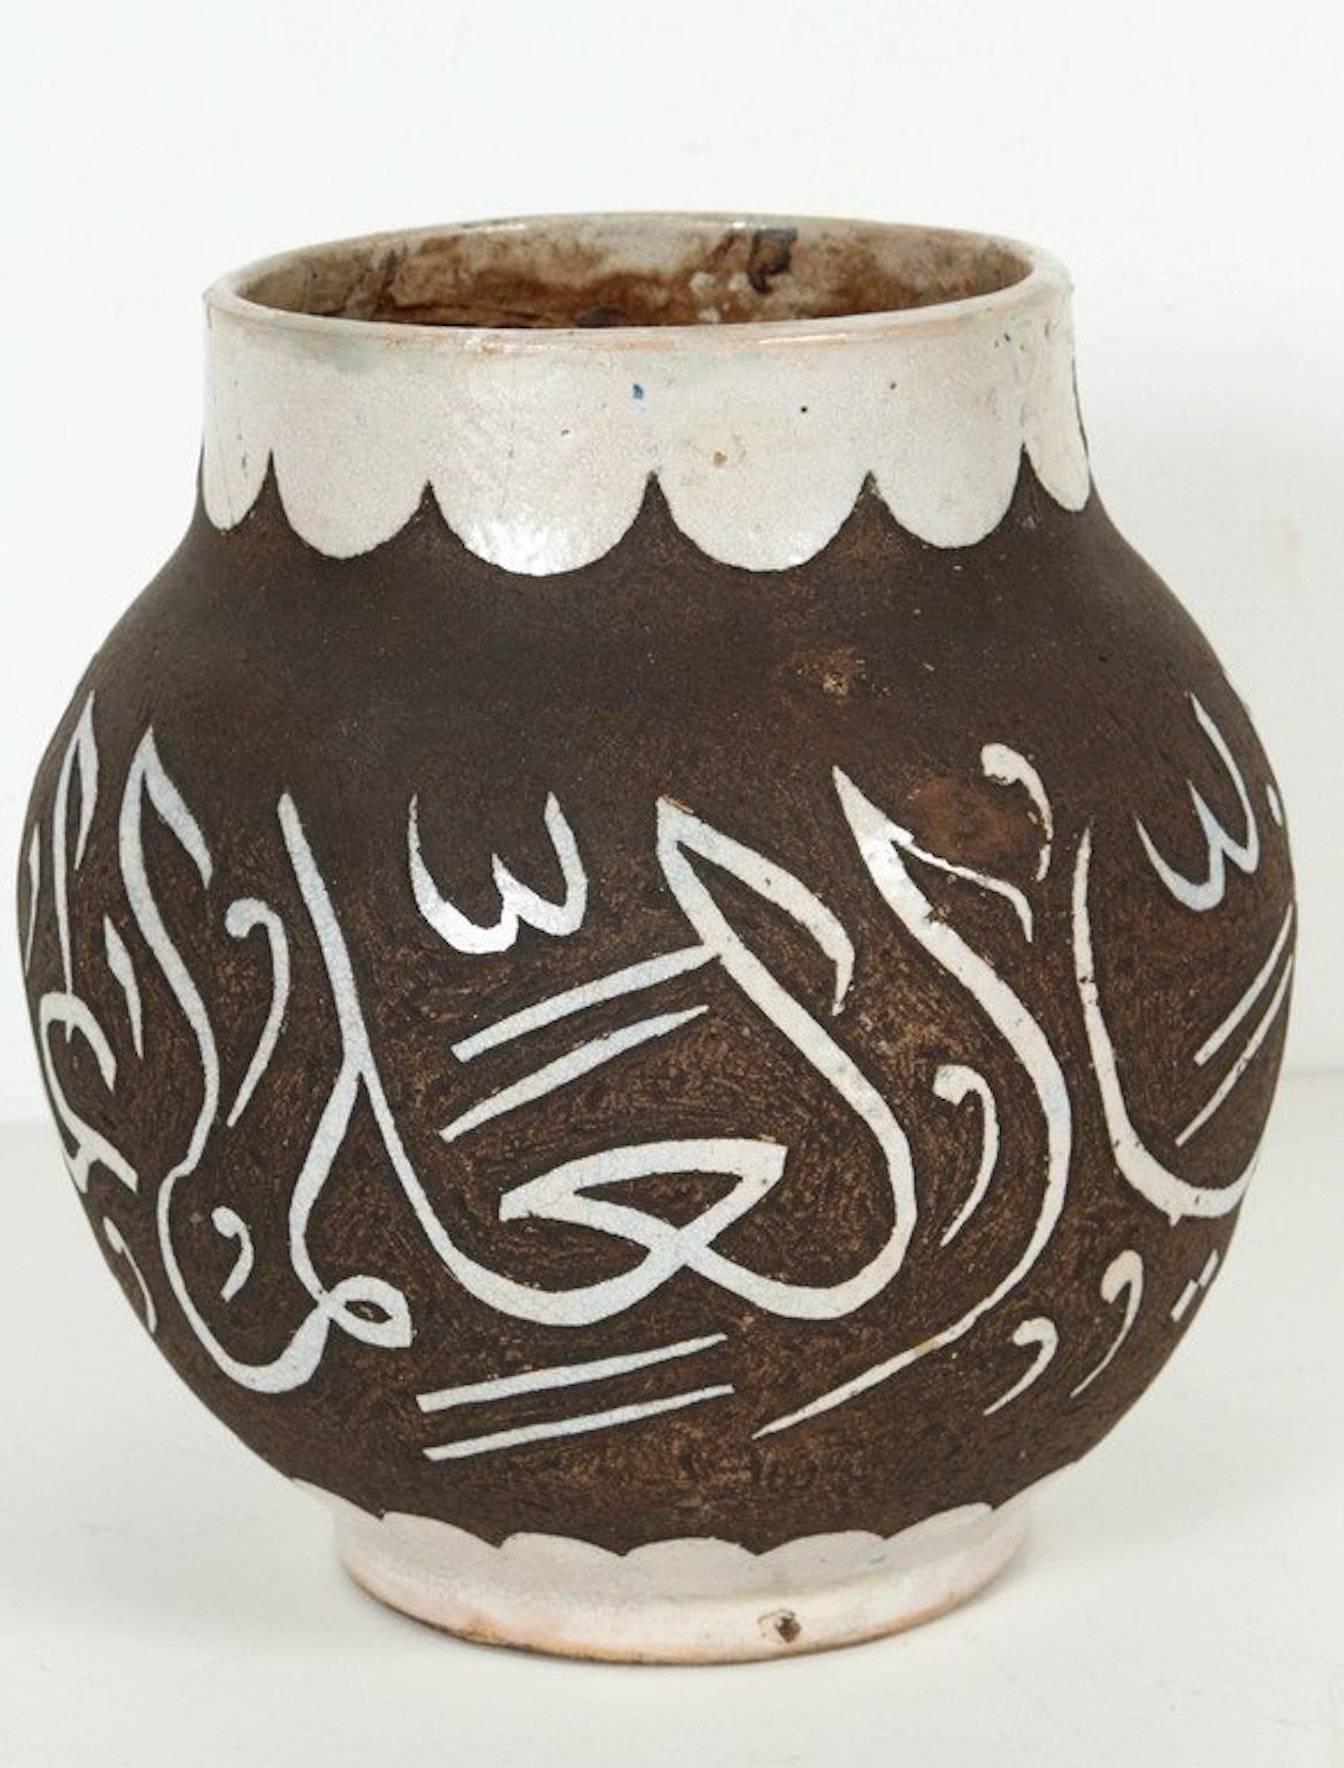 Decorative chiseled brown and ivory Moroccan ceramic vase from Fez hand-graved with ivory Arabic calligraphy.
This kind of Art Writing looks calligraphic is called Lettrism, it is a form of art that uses letters that are not supposed to mean